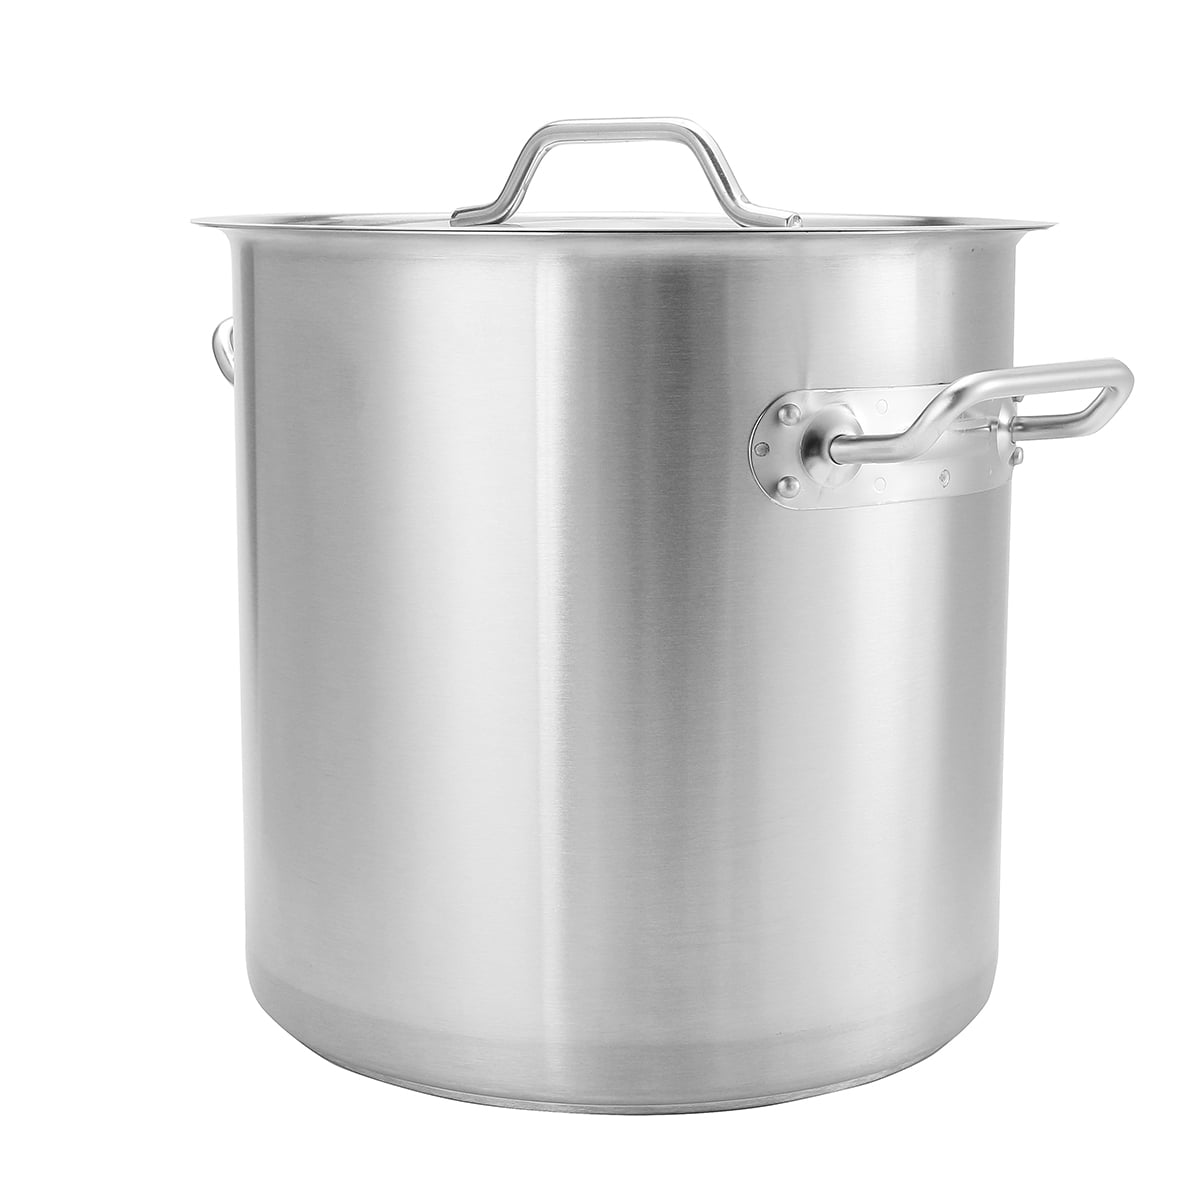 VEVOR 18/8 Stainless Steel Stockpot, 42QT Large Cooking Pots, Multipurpose  Cookware Sauce Pot with Composite Base, Heavy Duty Commercial Grade Stock